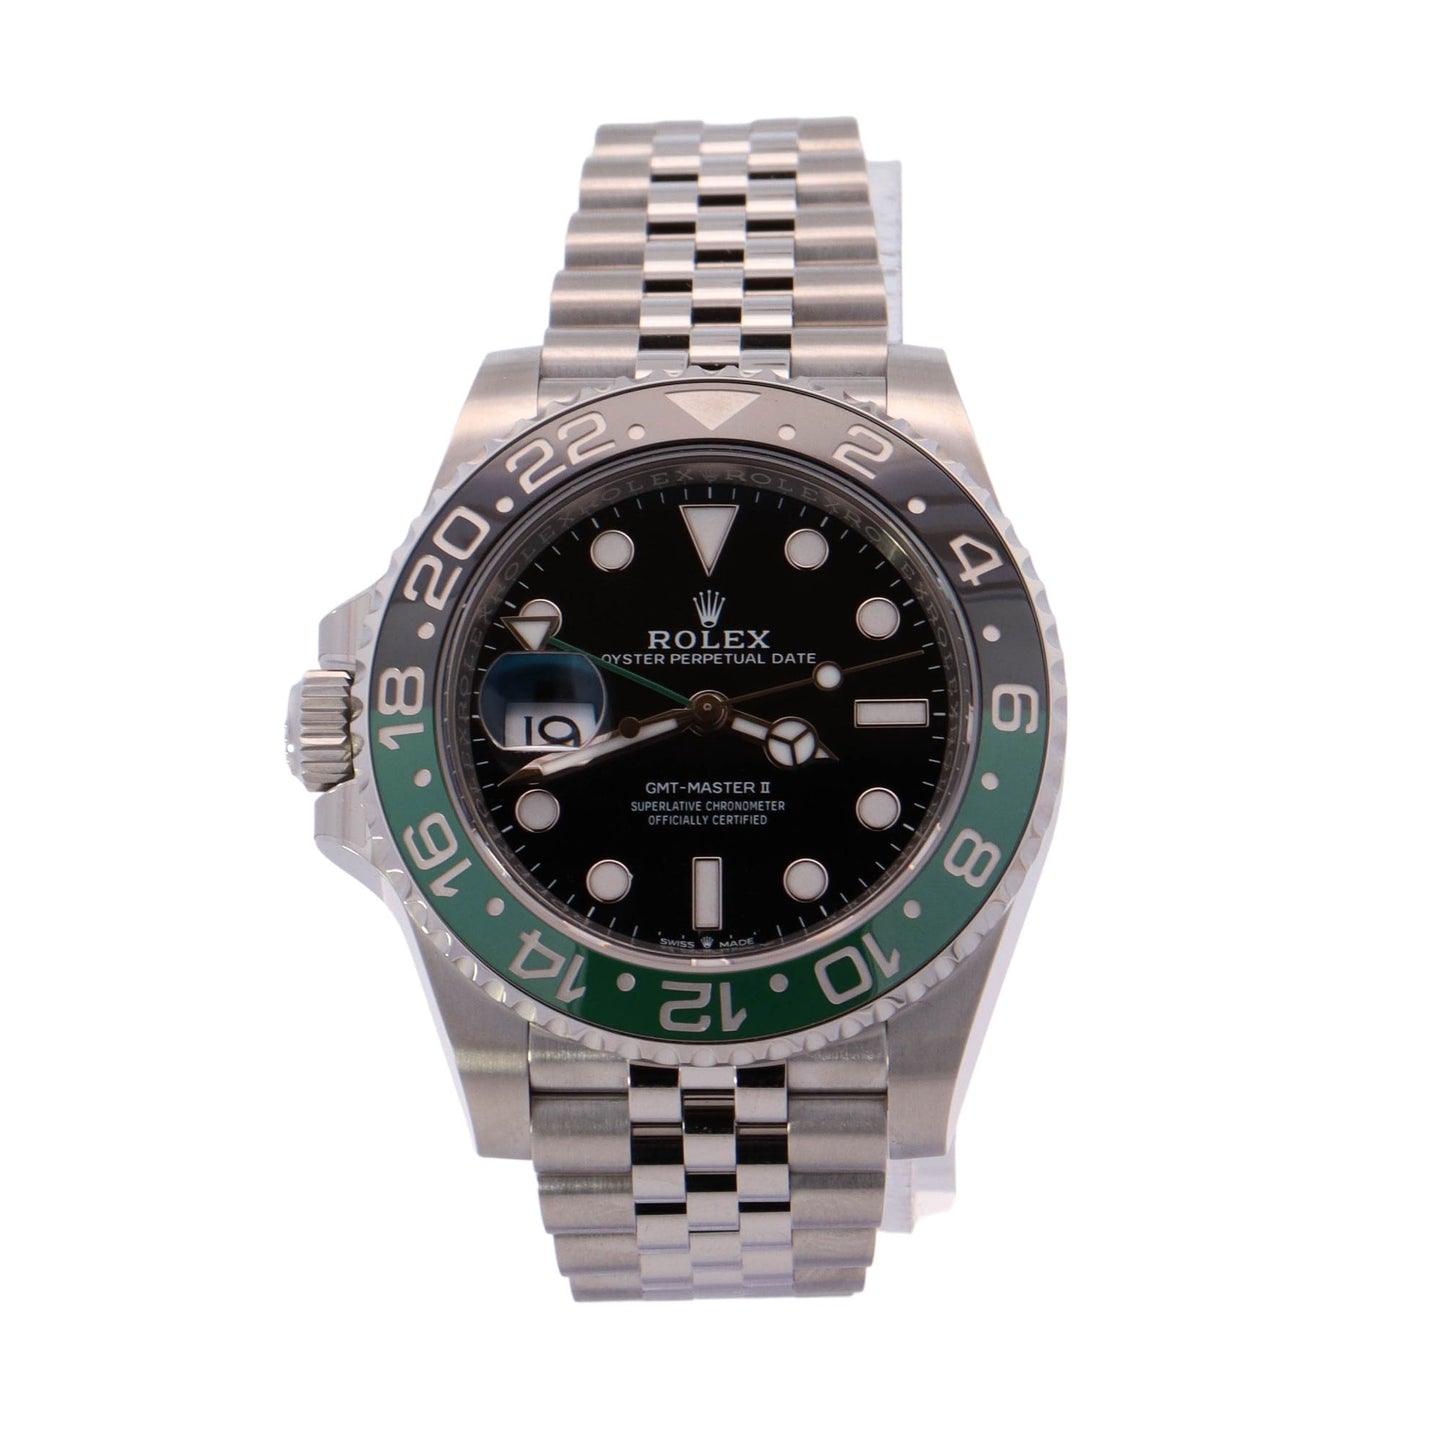 Rolex GMT Master II Stainless Steel 40mm "SPRITE" Black Dot Dial Watch Reference #:126720VTNR